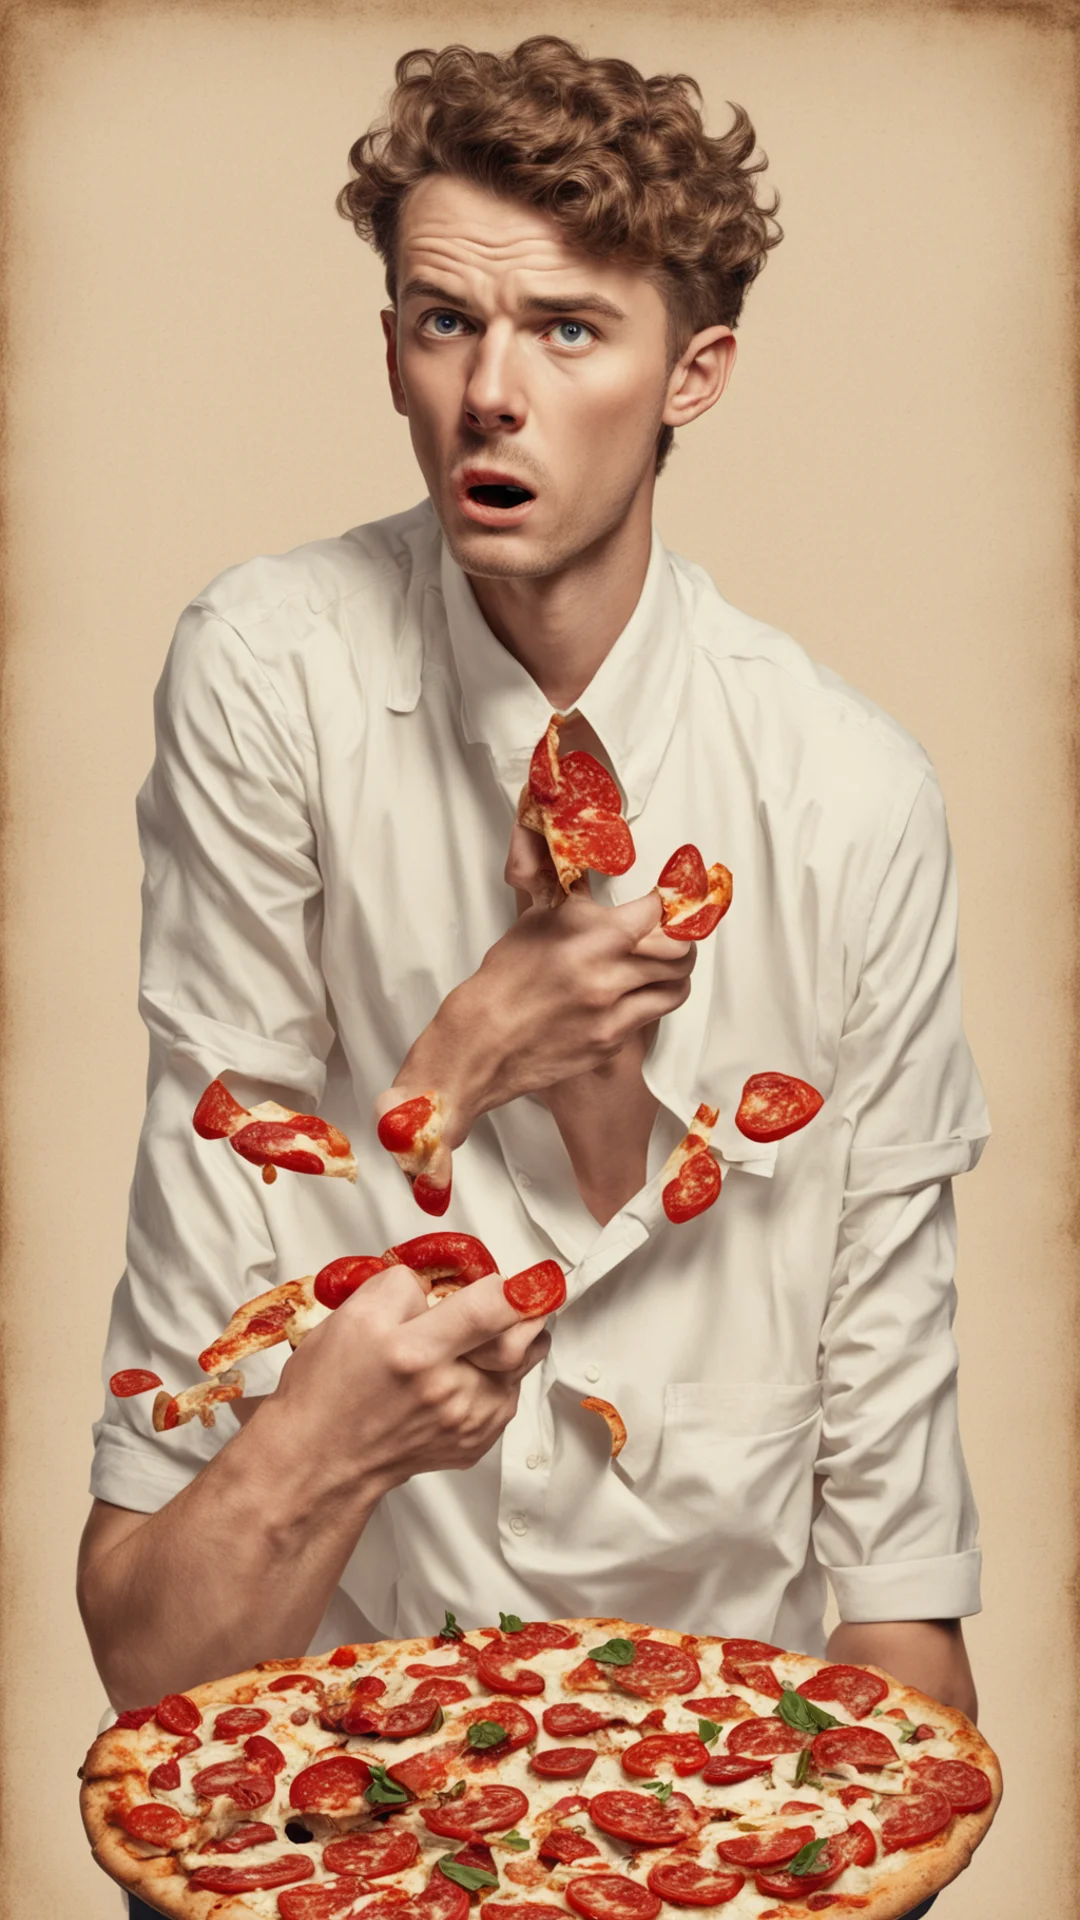 aiangry young man ravishing pizza in the style of norman rockwell tall